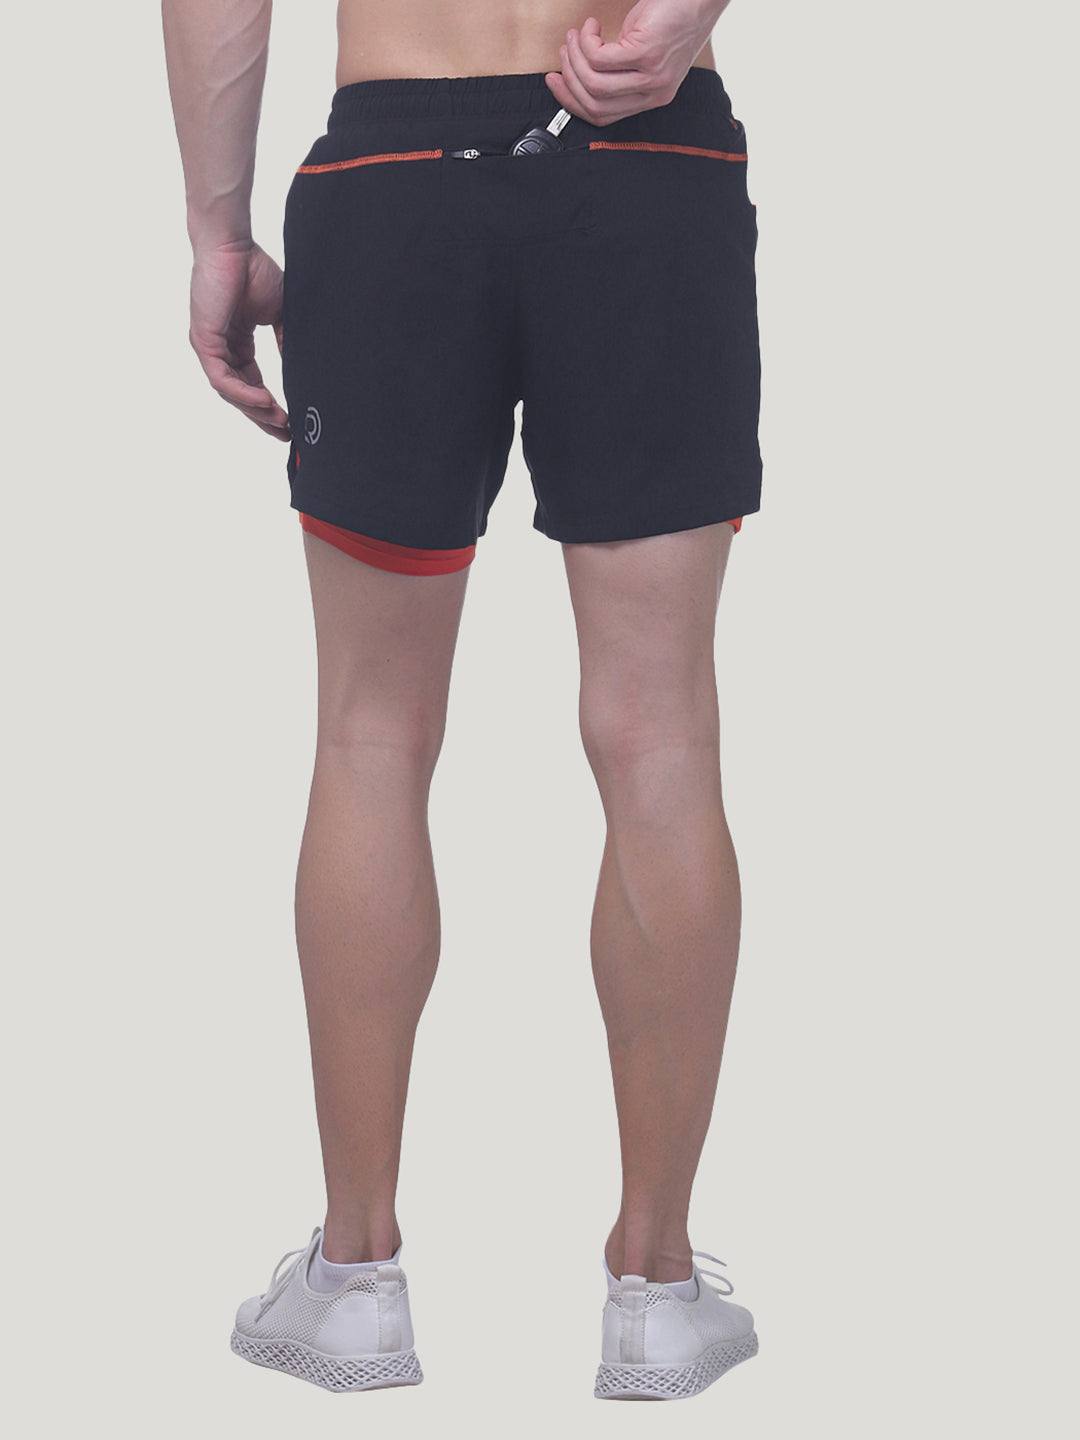 2-in-1 Running Shorts with Water Resistant Phone Pocket 5"